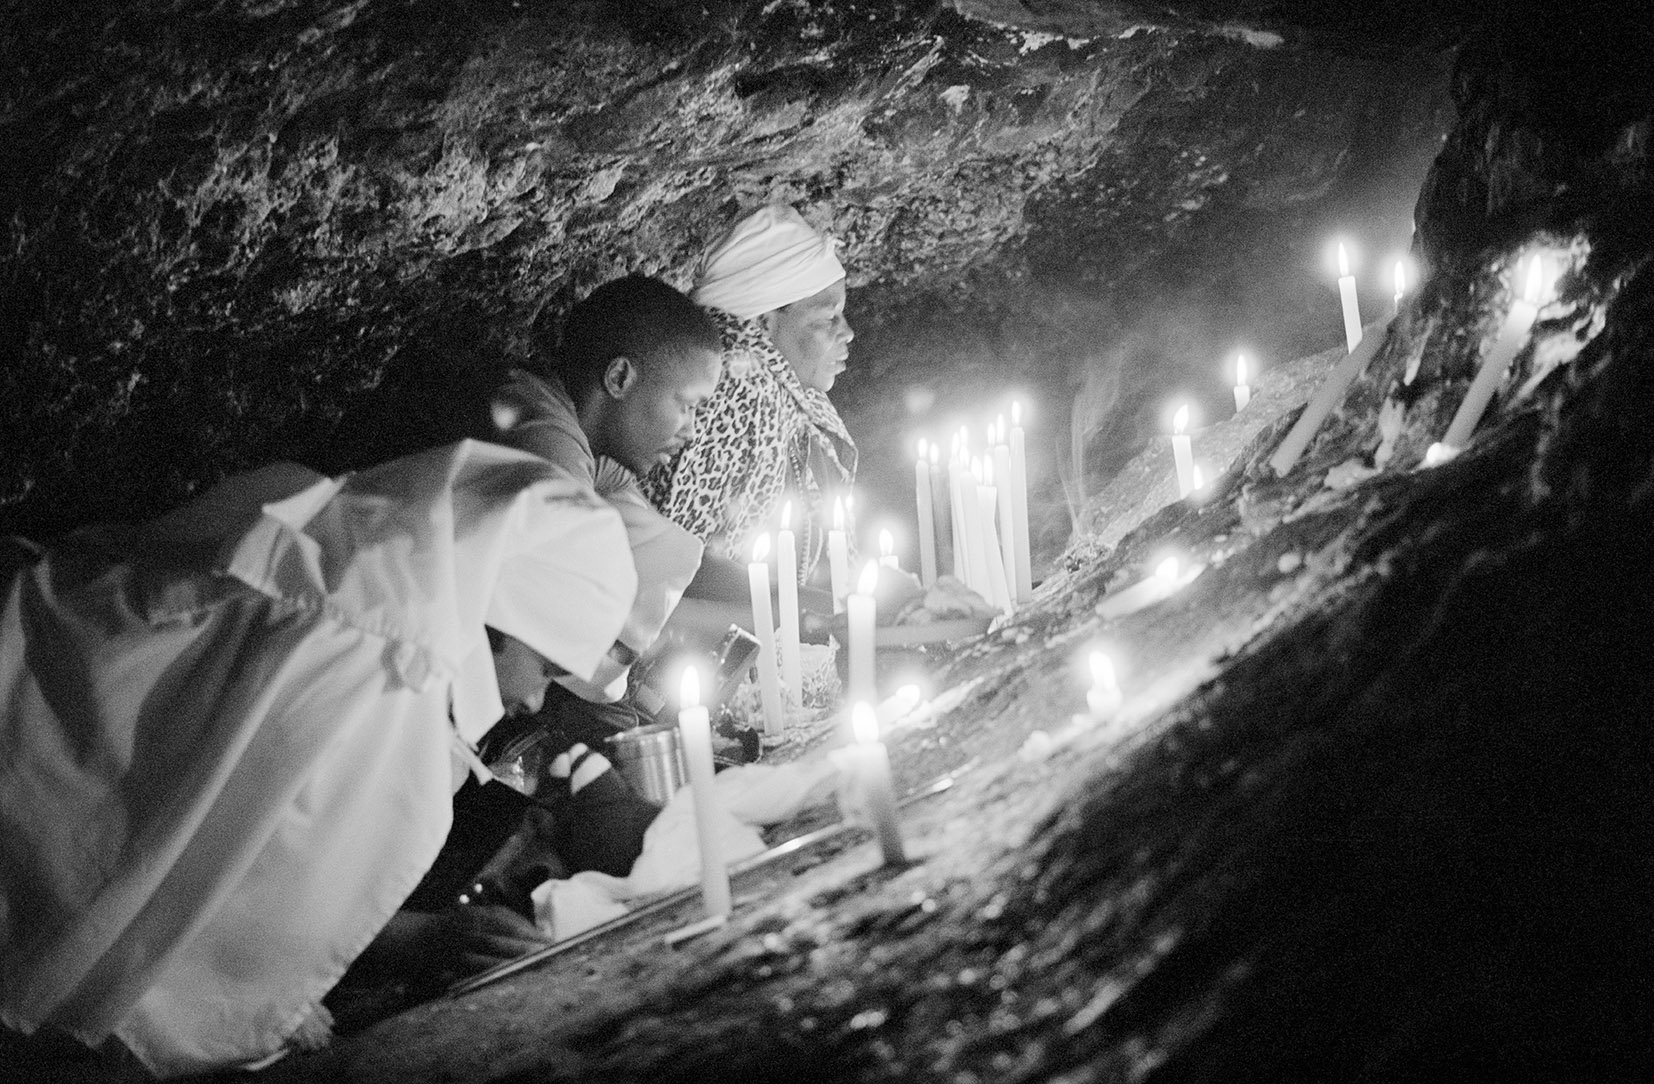  Mthunzi and Miesie Making Supplications to the Ancestors Inside the Motouleng Sanctum - Free State/ 2008 